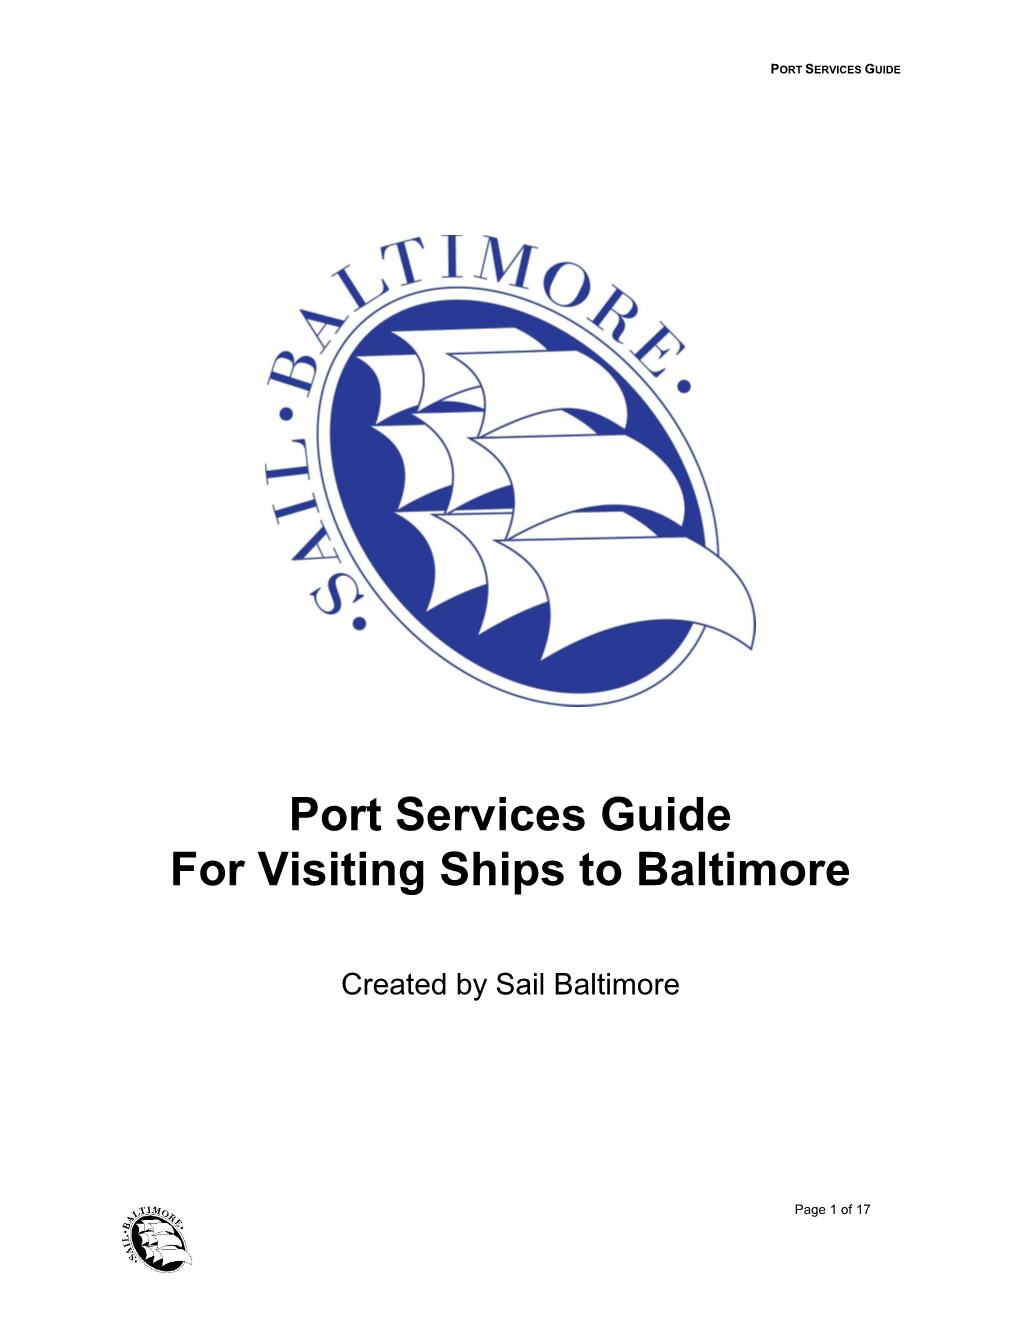 Sail Baltimore's Port Services Guide for Visiting Ships